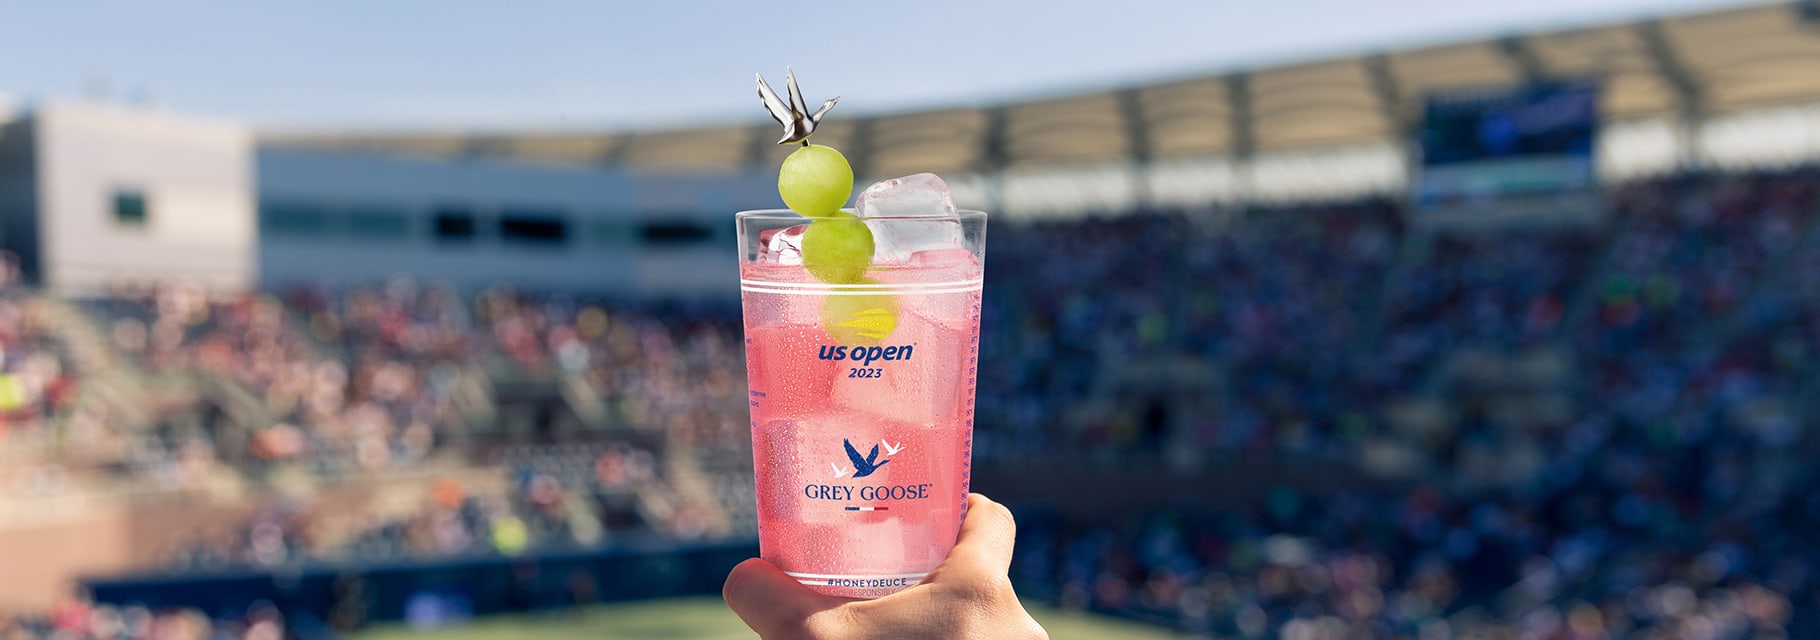 How to Throw a US Open Tennis Viewing Party